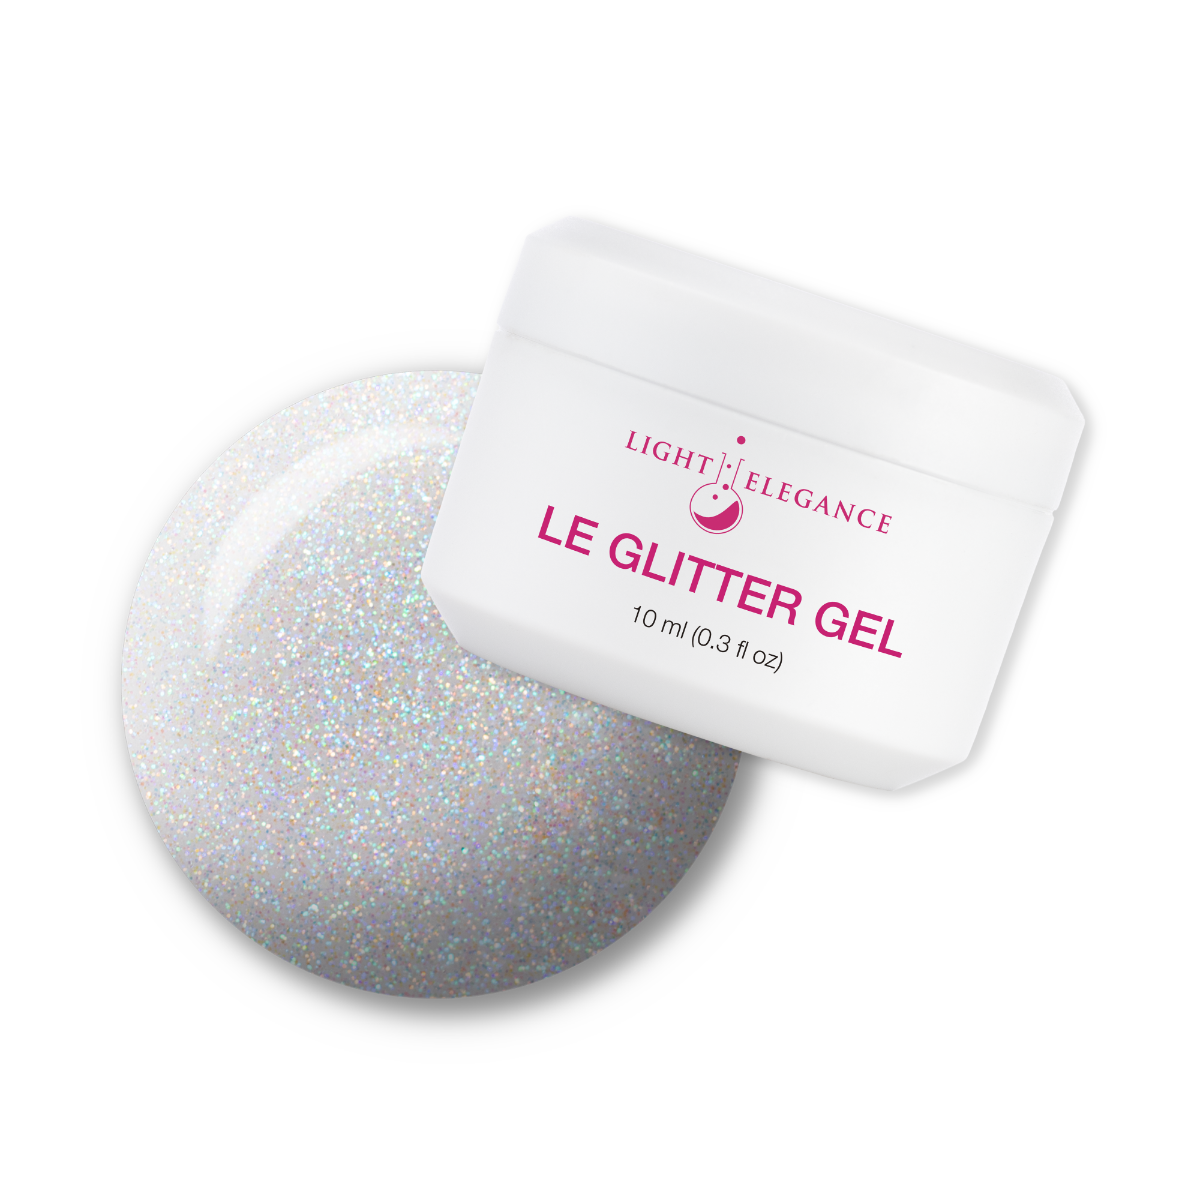 Light Elegance Glitter Gel - Crystal :: New Packaging - Creata Beauty - Professional Beauty Products